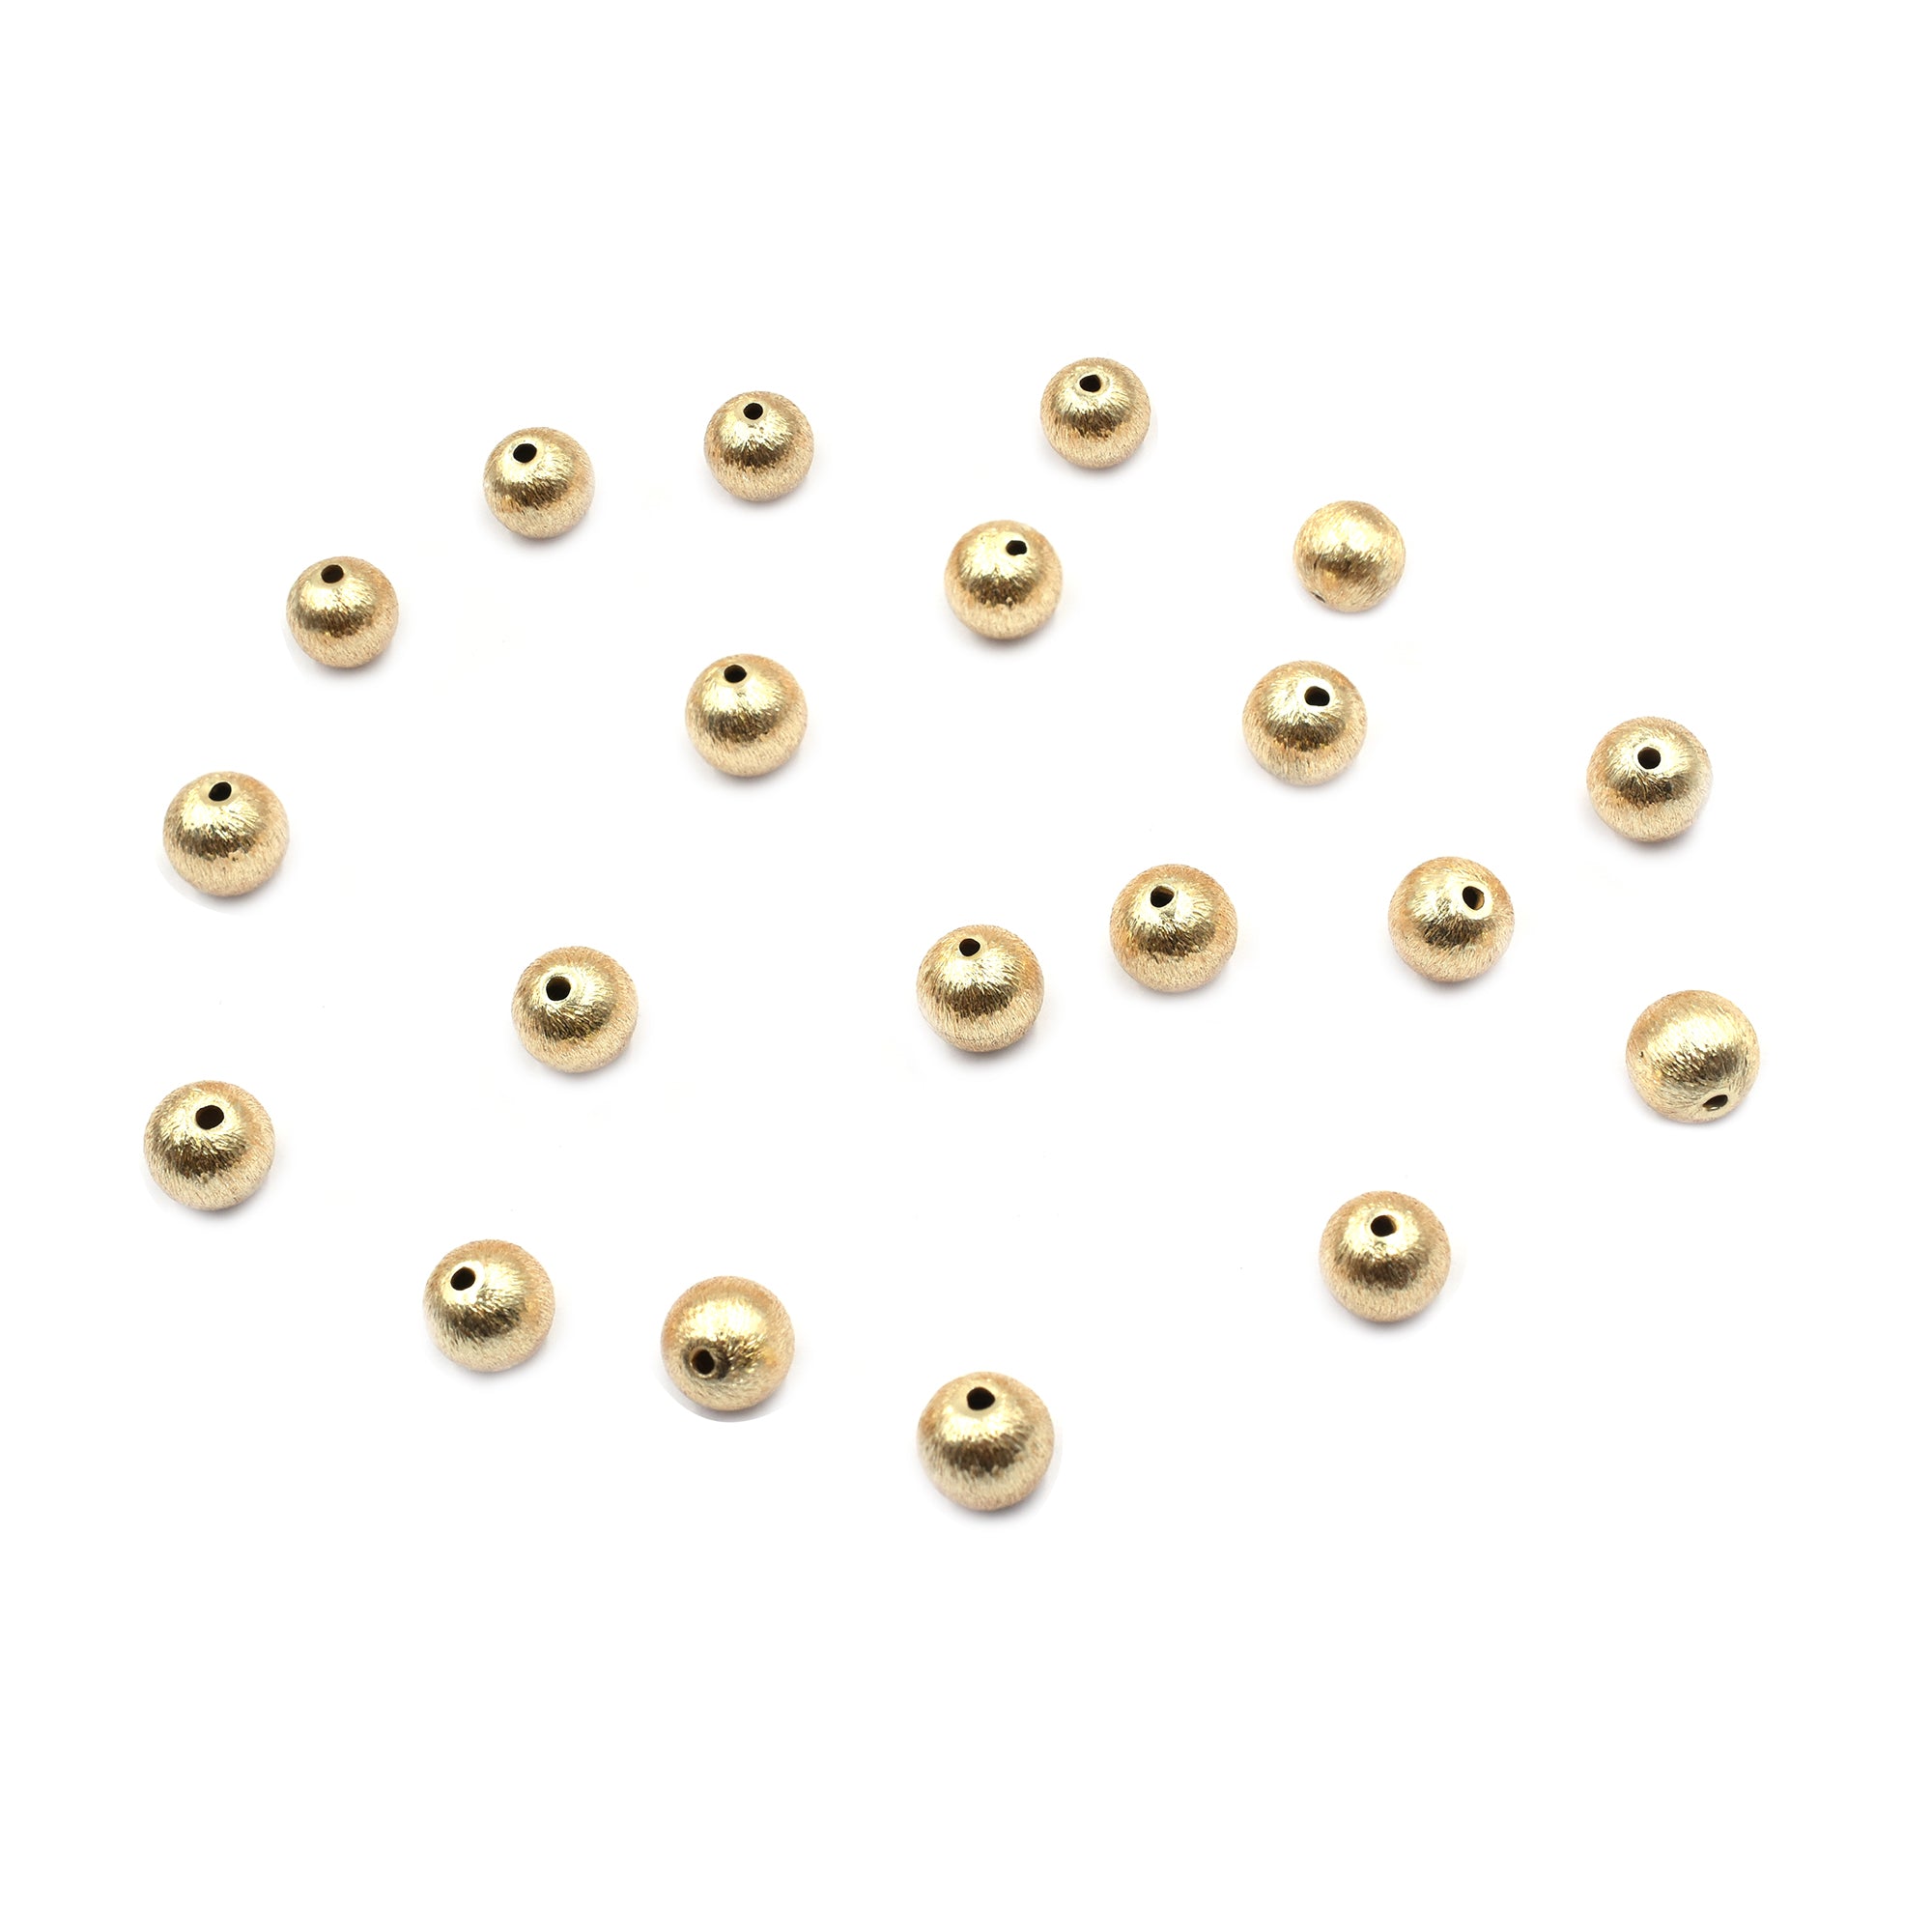 50 Pcs 8mm Balls Brushed Matte Finish Beads Gold Plated Copper